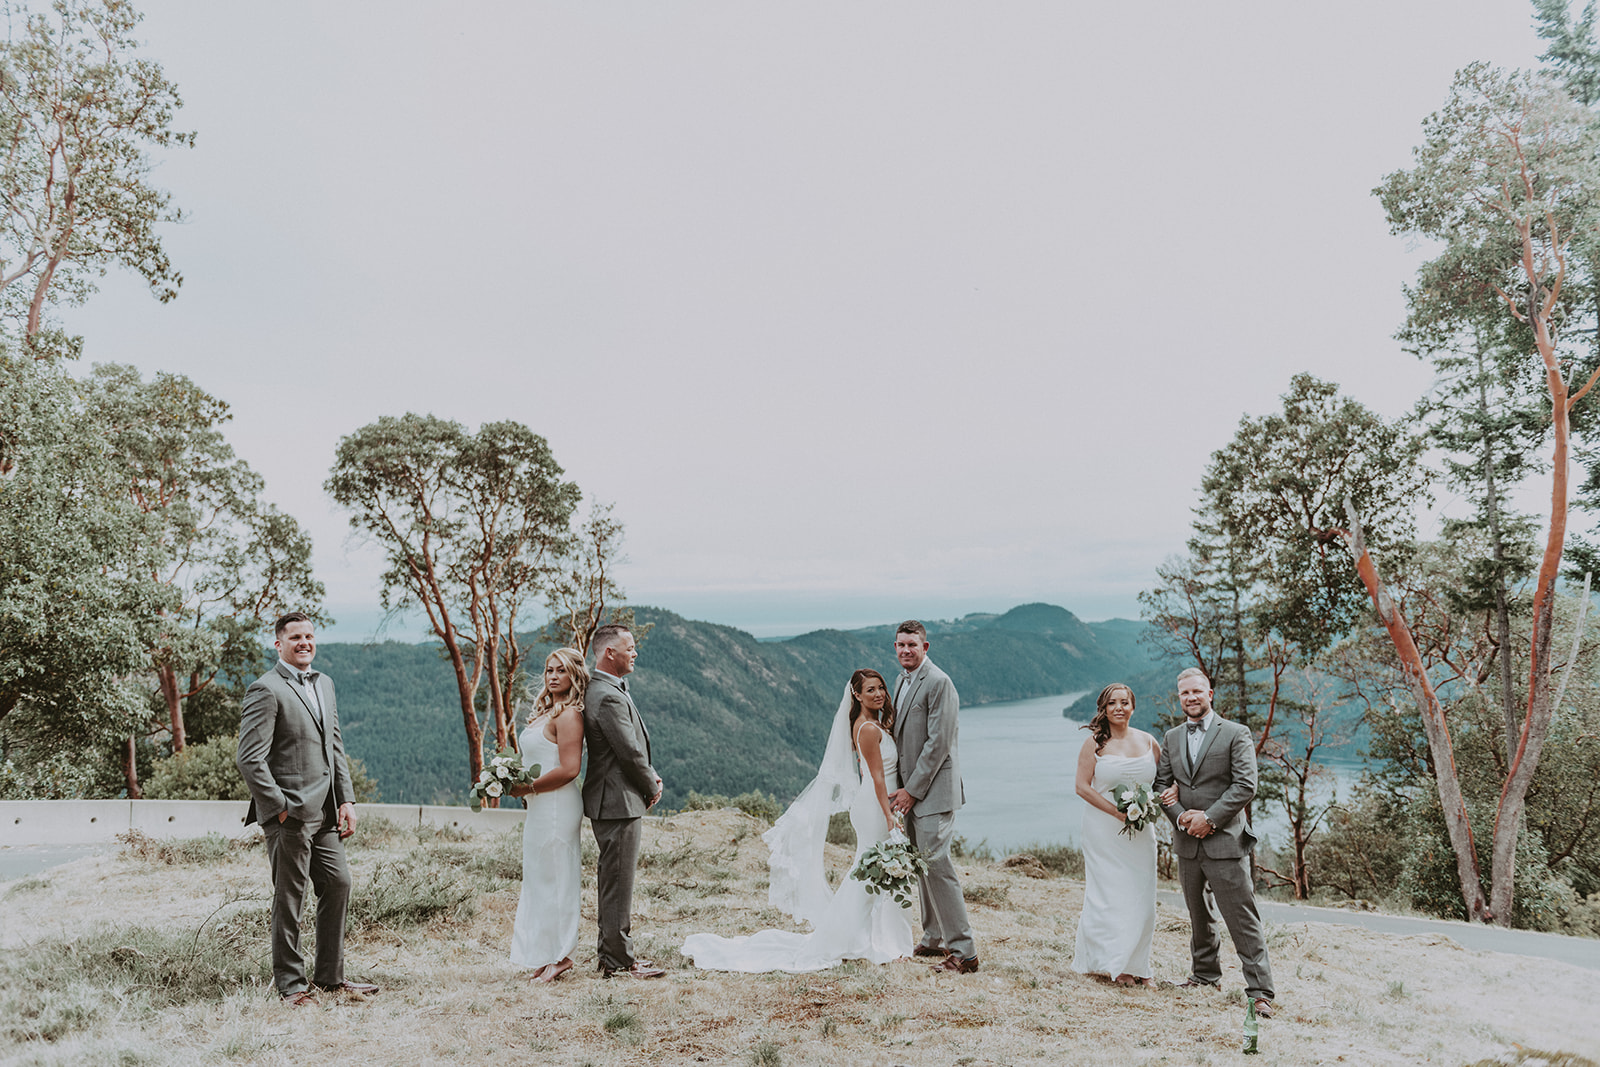 Vancouver Island wedding photography, creative images of the wedding party